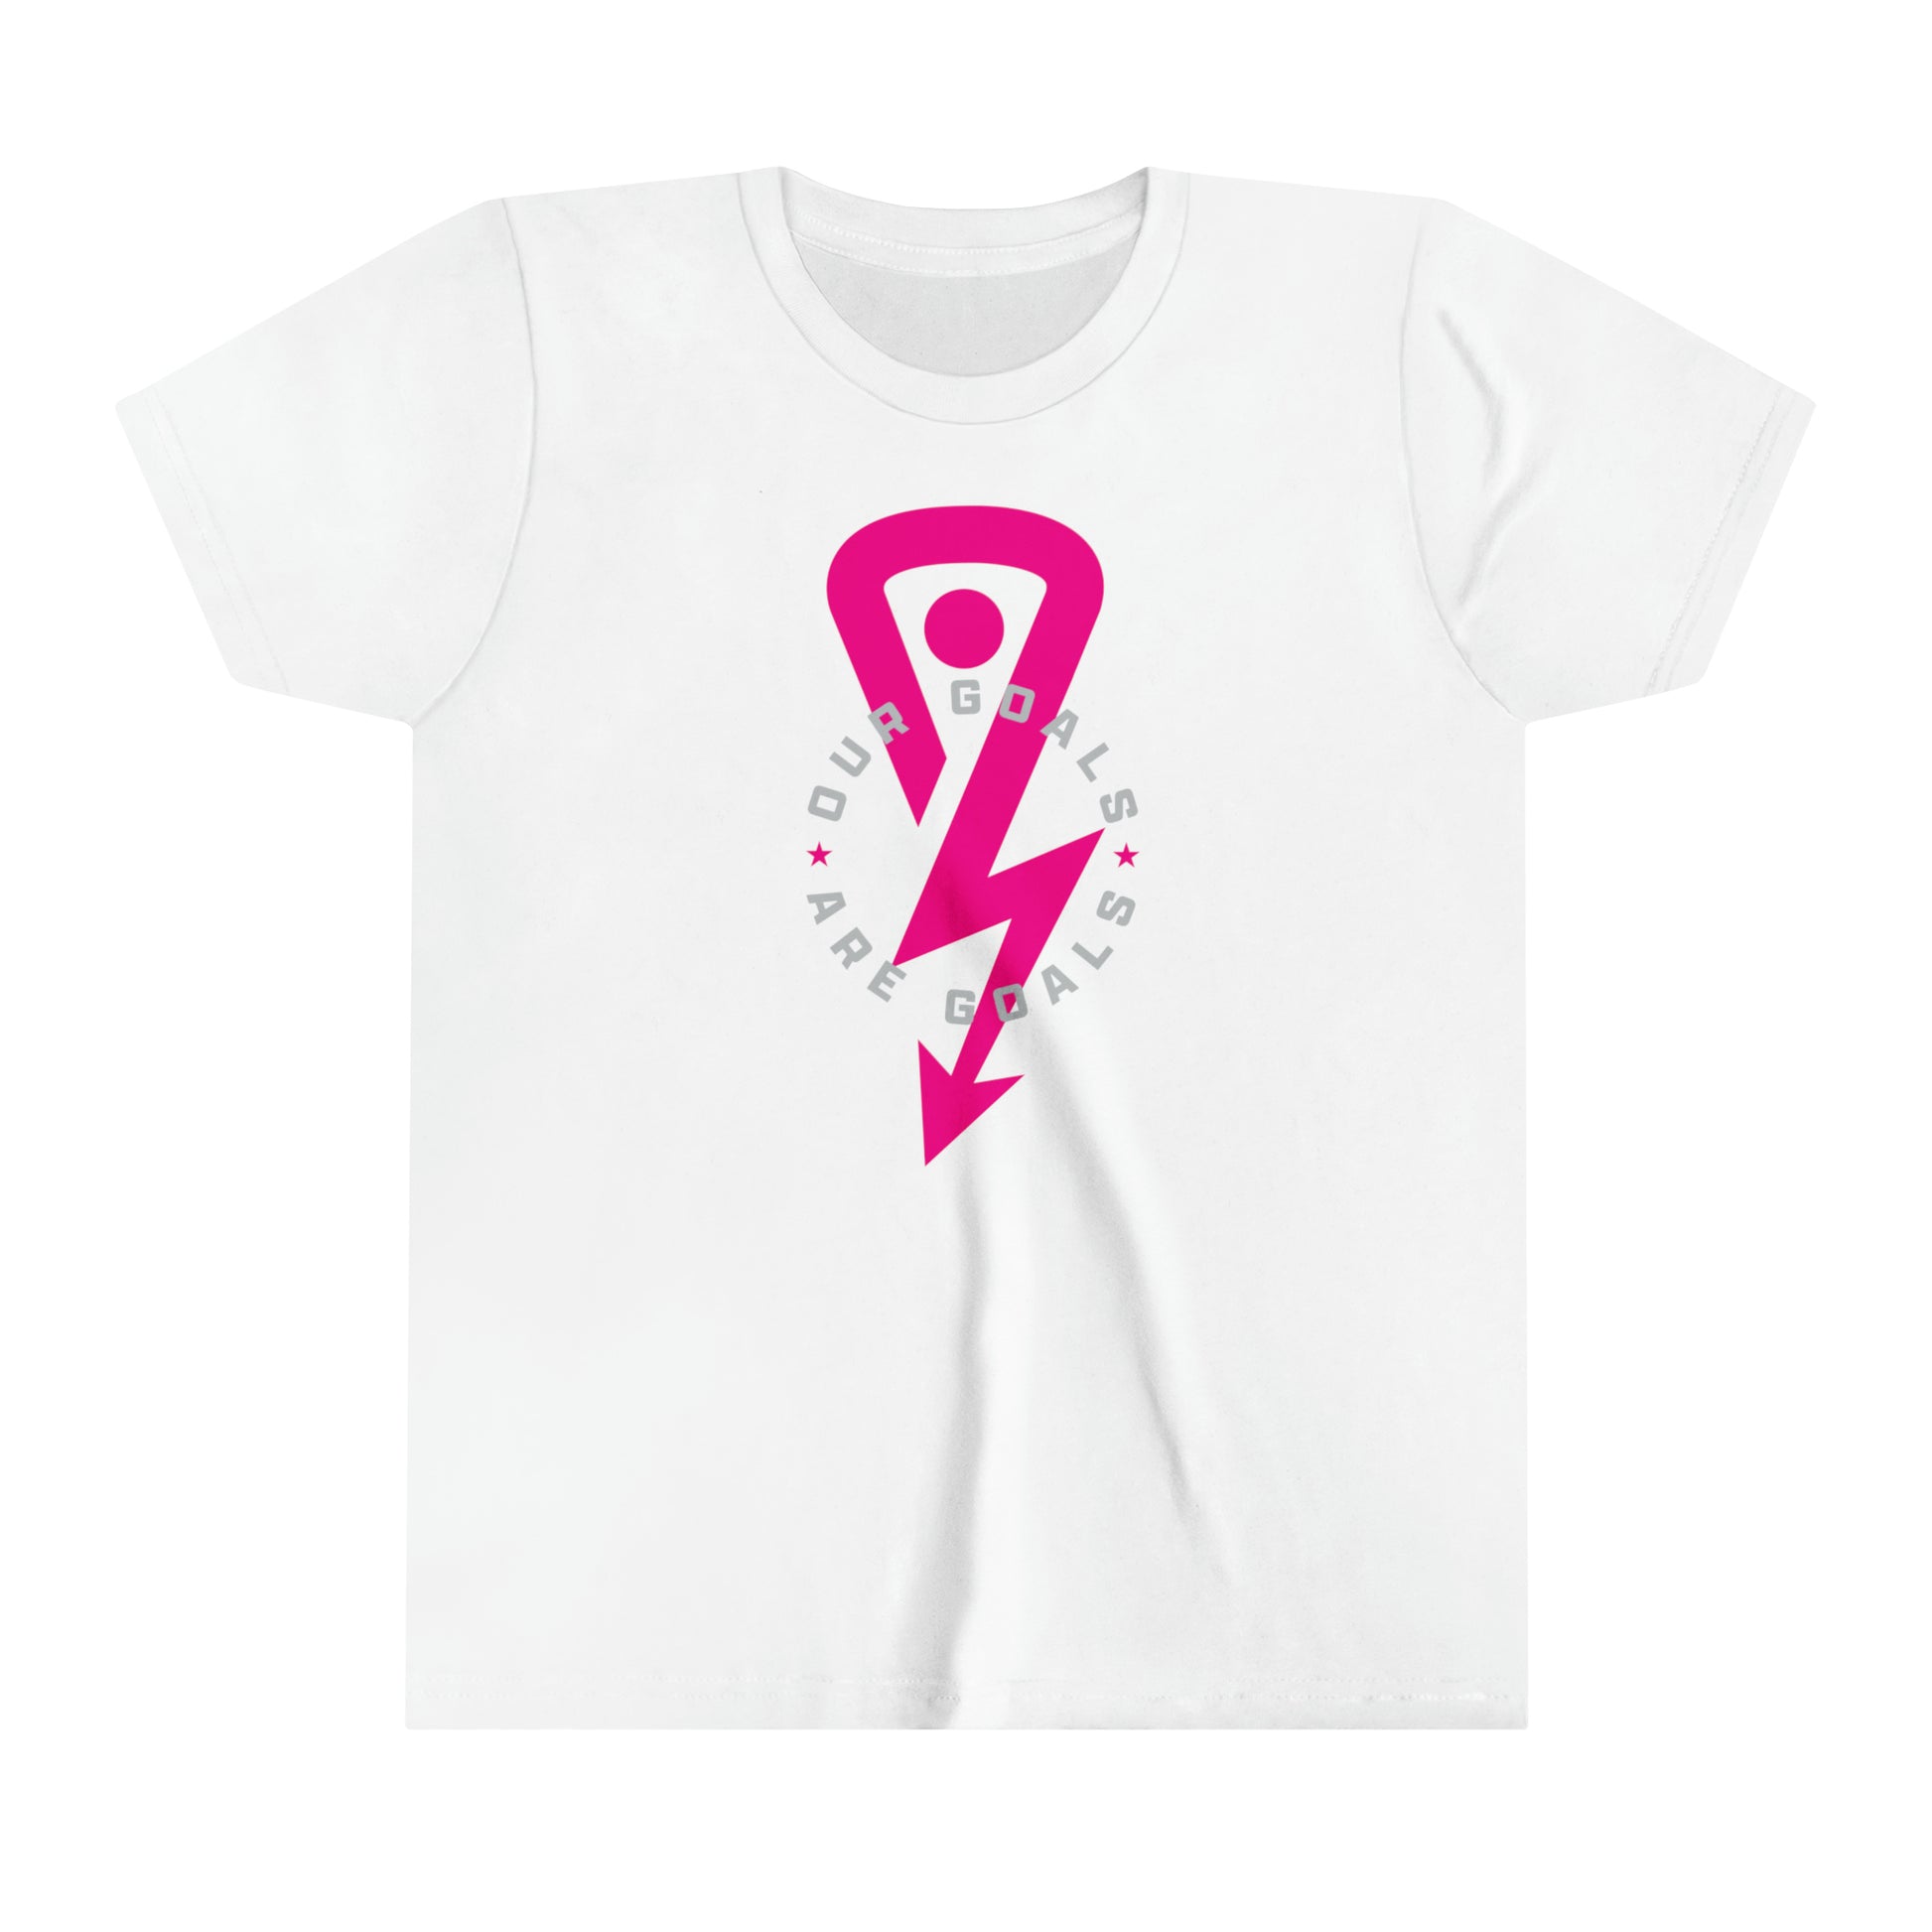 Youth White Our Goals are Goals Short Sleeve T-shirt with hot pink logo